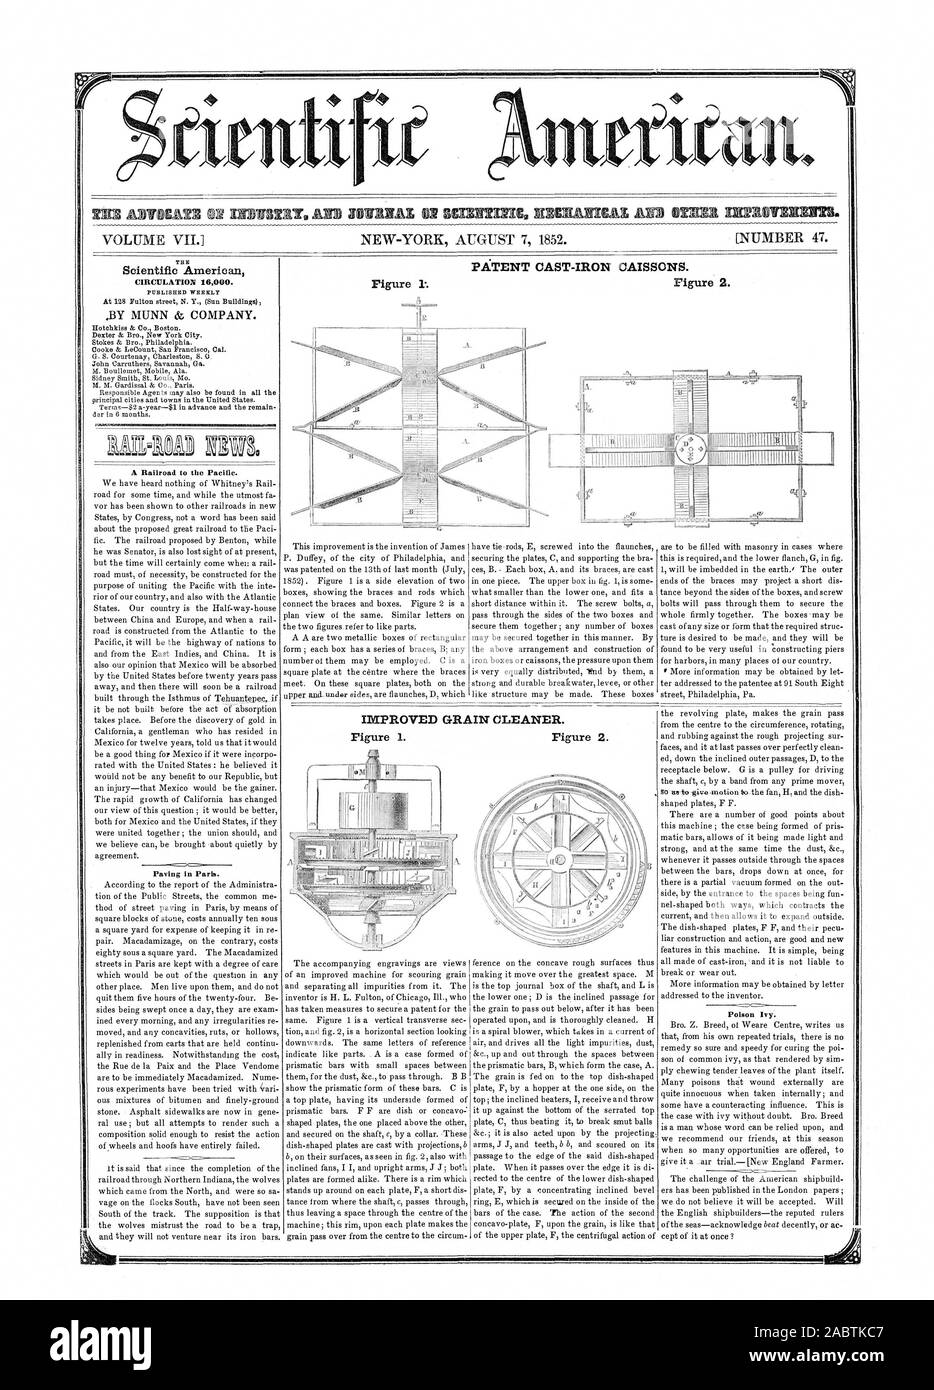 PATENT CAST-IRON CAISSONS. Figure 2. THE Scientific Americaxt CIRCULATION 16000. PUBLISHED WEEKLY BY MUNN & COMPANY. ¢5700. Paving in Paris. Poison Ivy. Figure IMPROVED GRAIN CLEANER., scientific american, 1852-08-07 Stock Photo